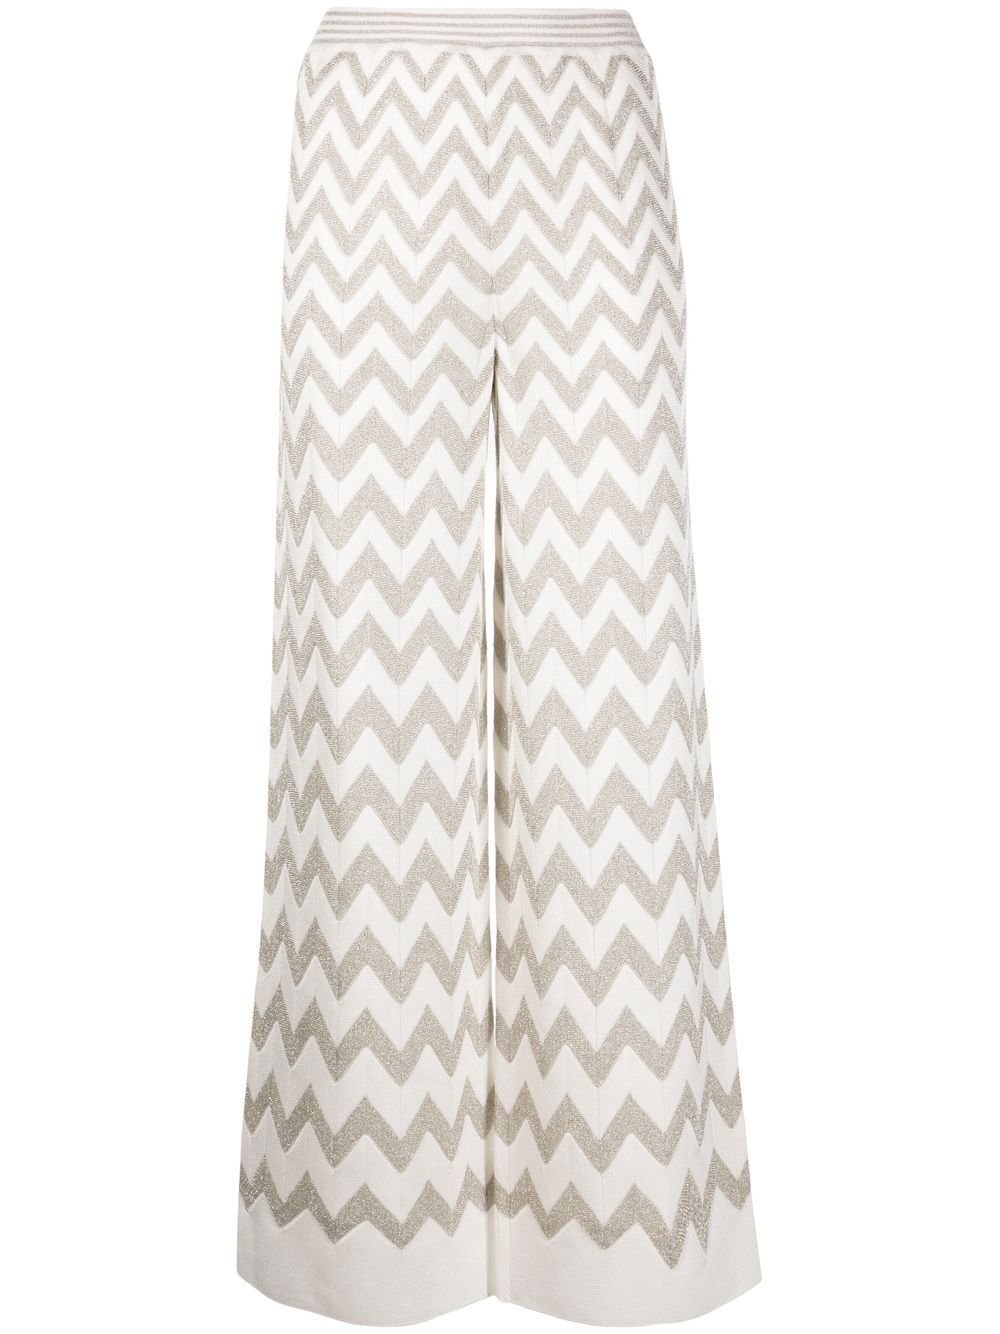 MissoniZig-Zag straight trousers at Fashion Clinic